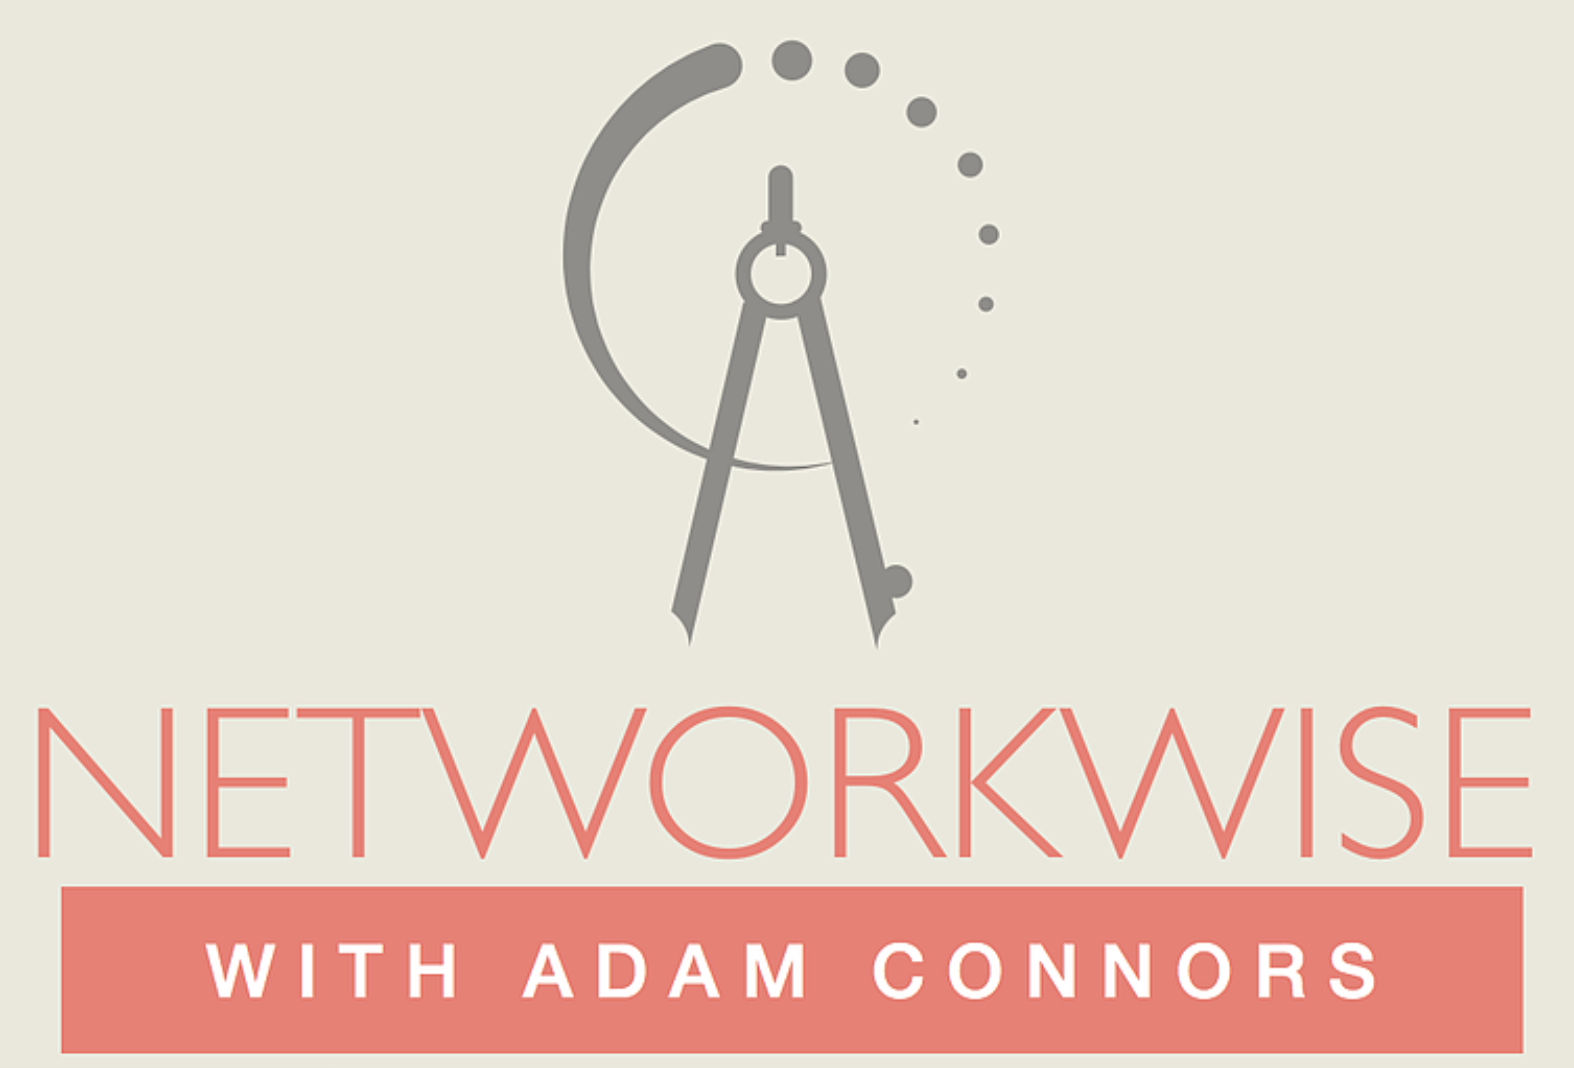 networkwise networking consulting firm